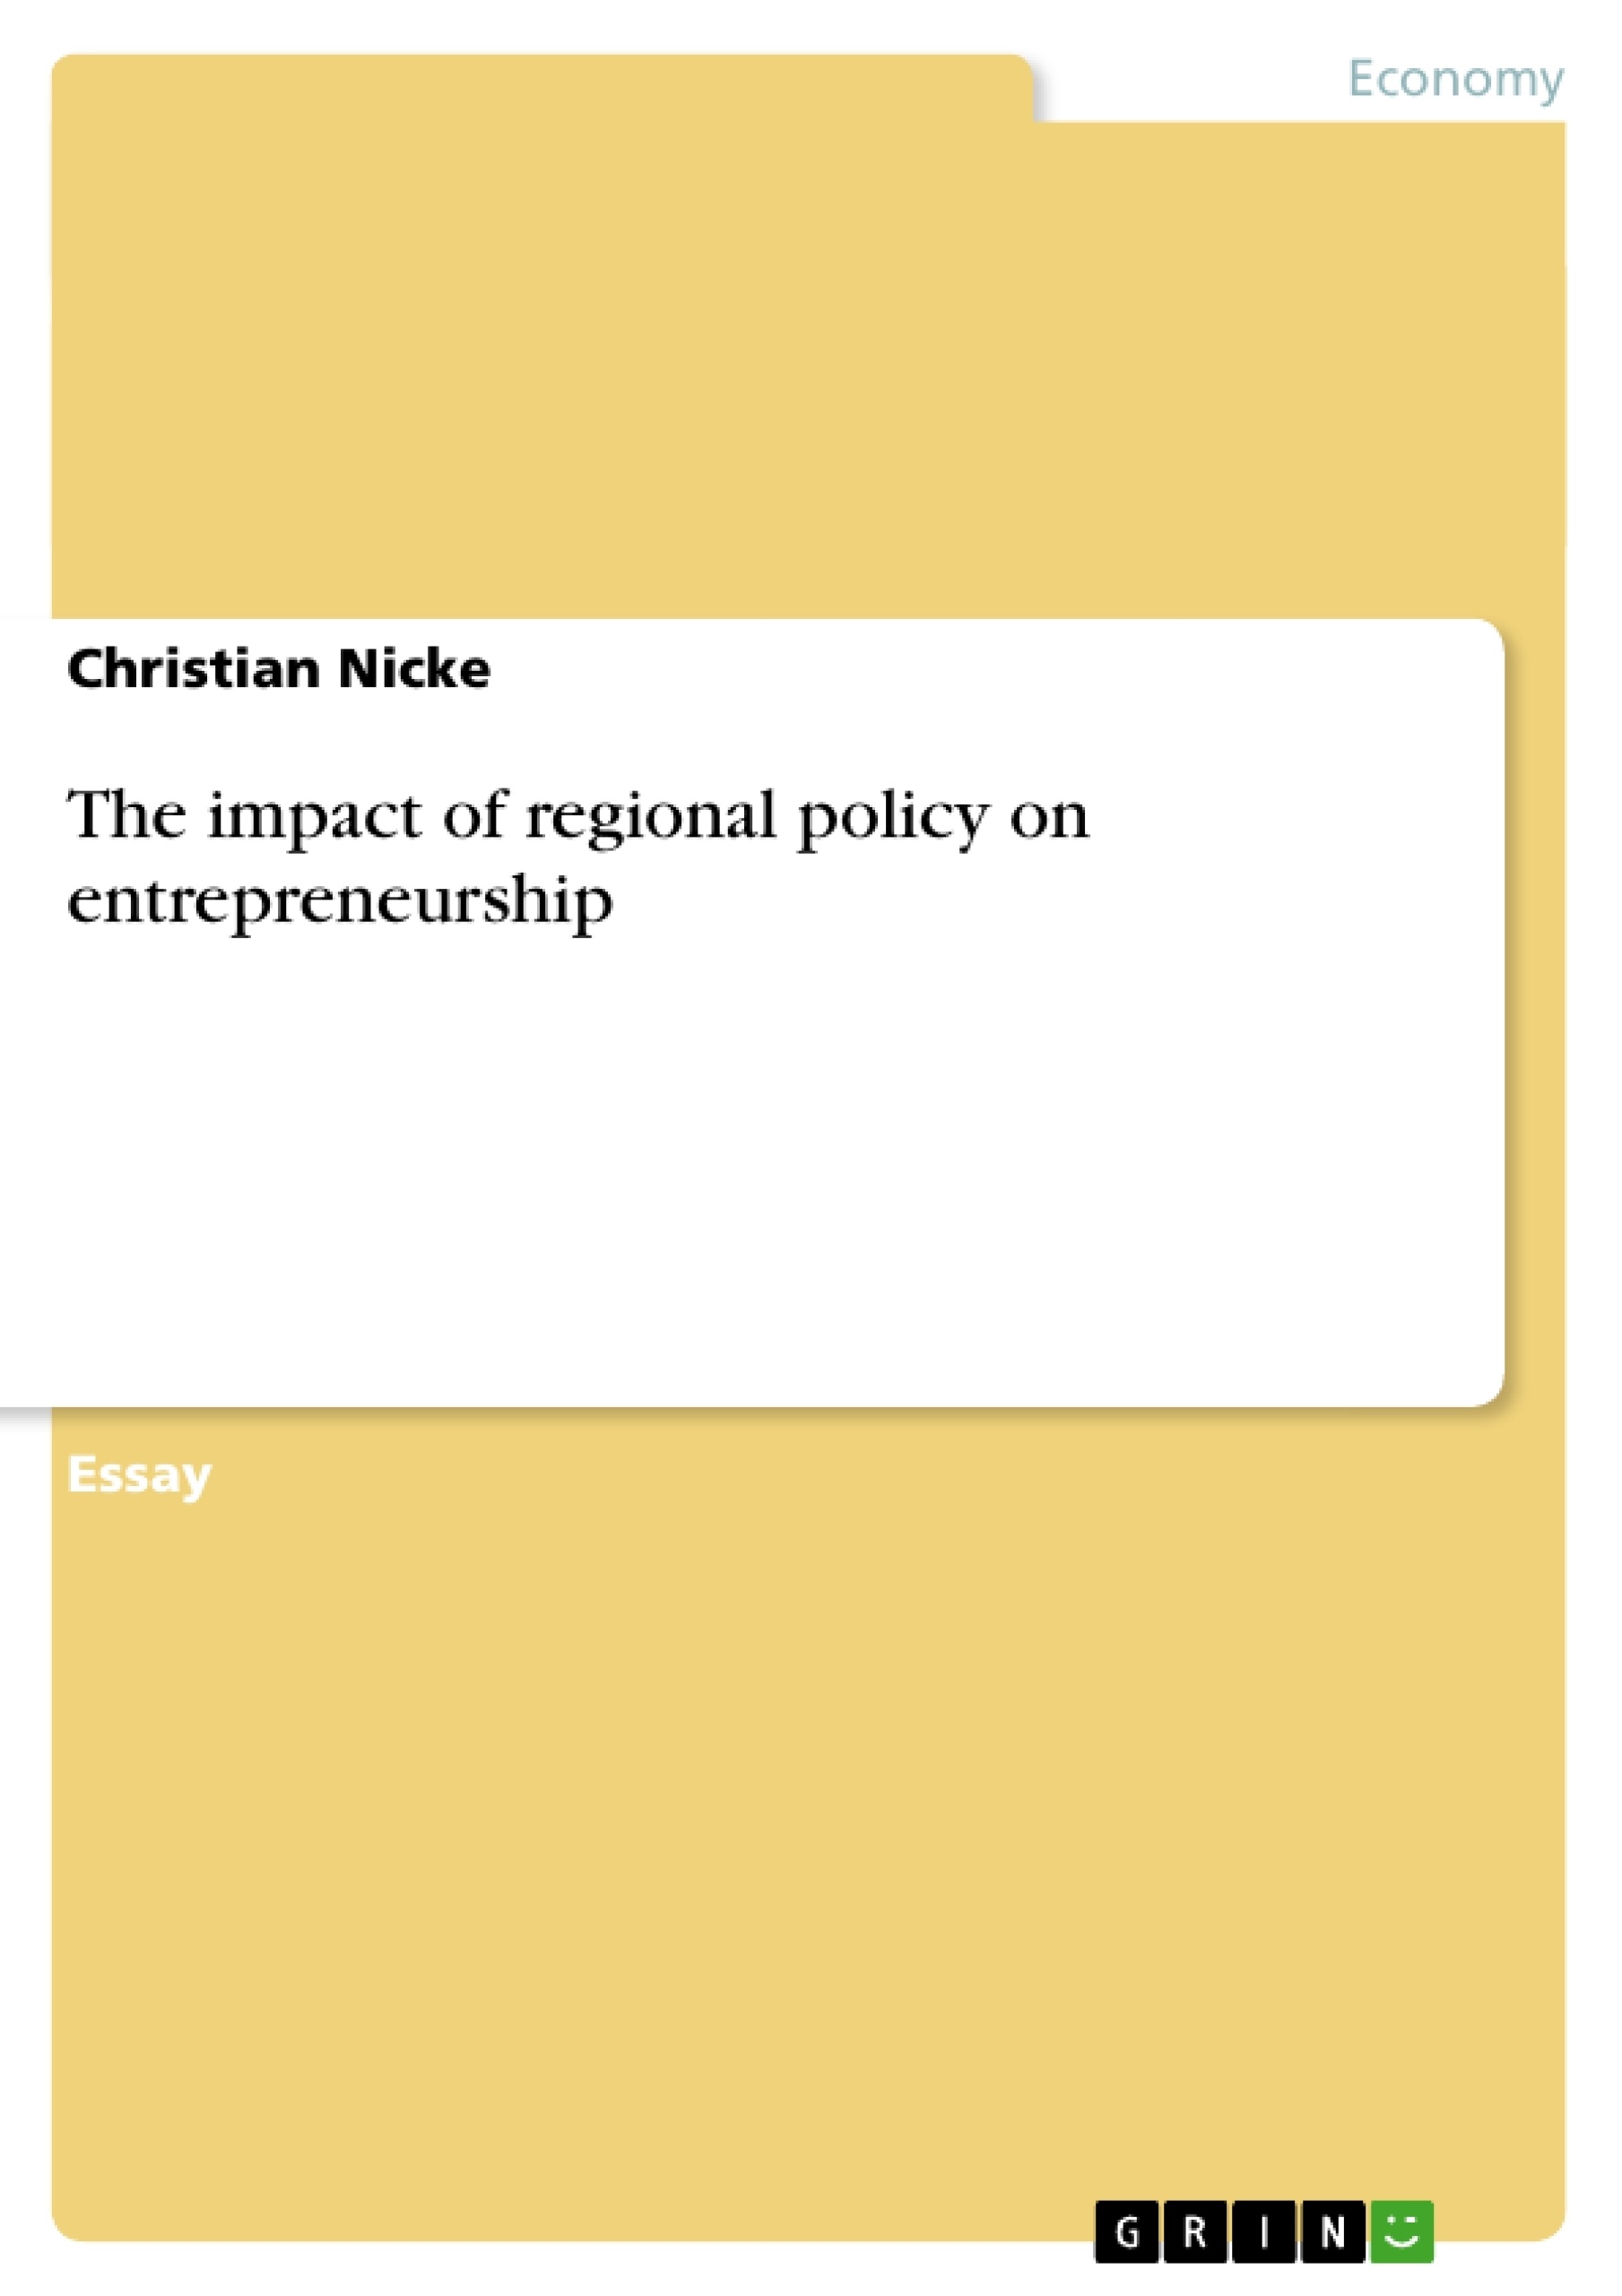 Title: The impact of regional policy on entrepreneurship